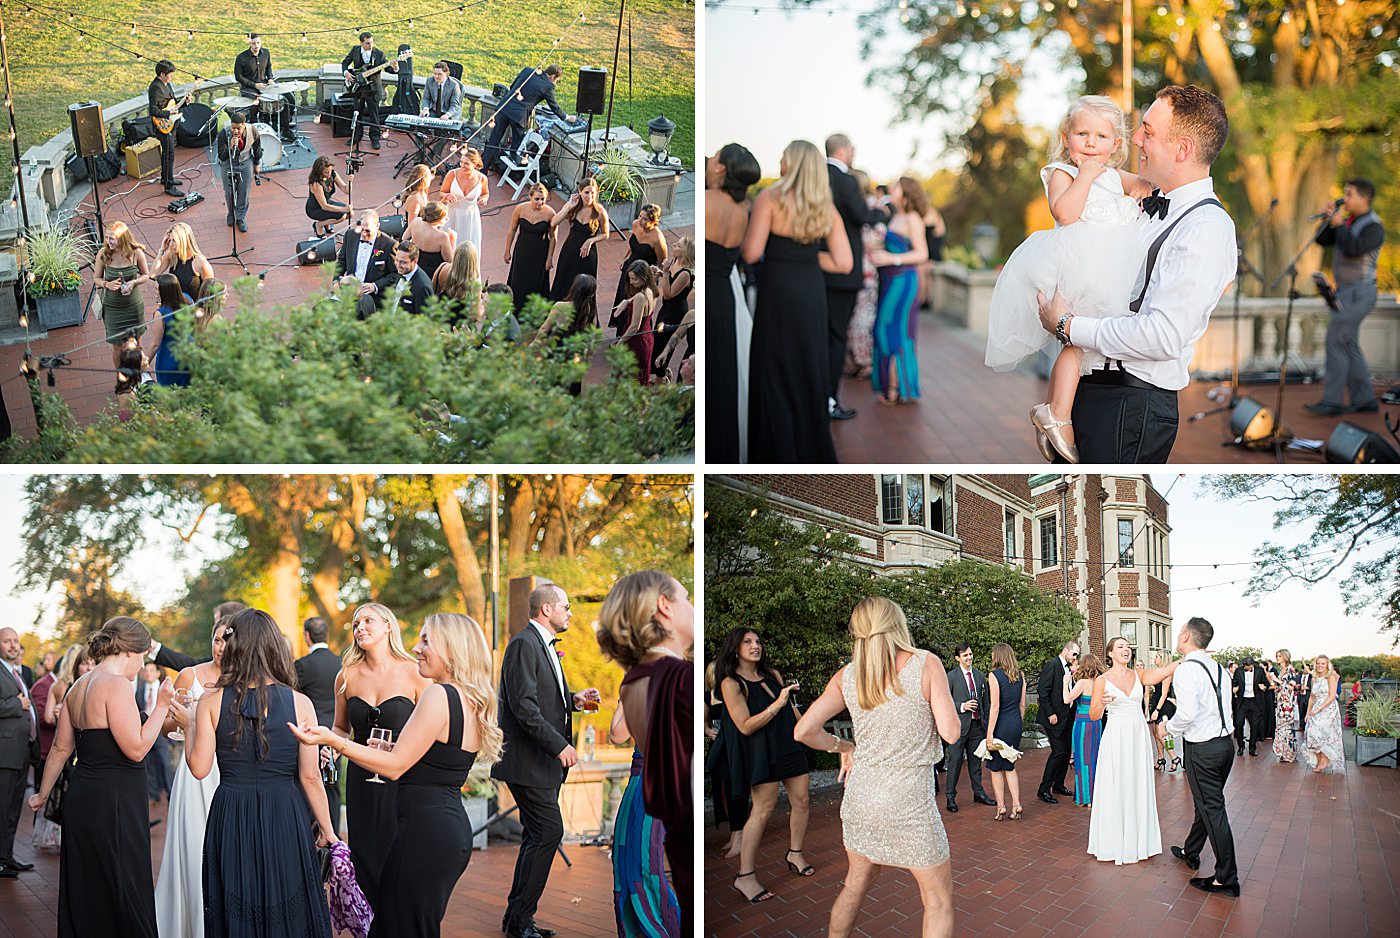 Waveny House wedding venue in New Canaan, Connecticut. Photos by Mikkel Paige Photography. This beautiful venue has an outdoor garden for the ceremony and indoor historic home for the reception. #mikkelpaige #wavenyhouse #wavenyhousewedding #connecticutweddingvenue #connecticutweddingphotographer #weddingreception